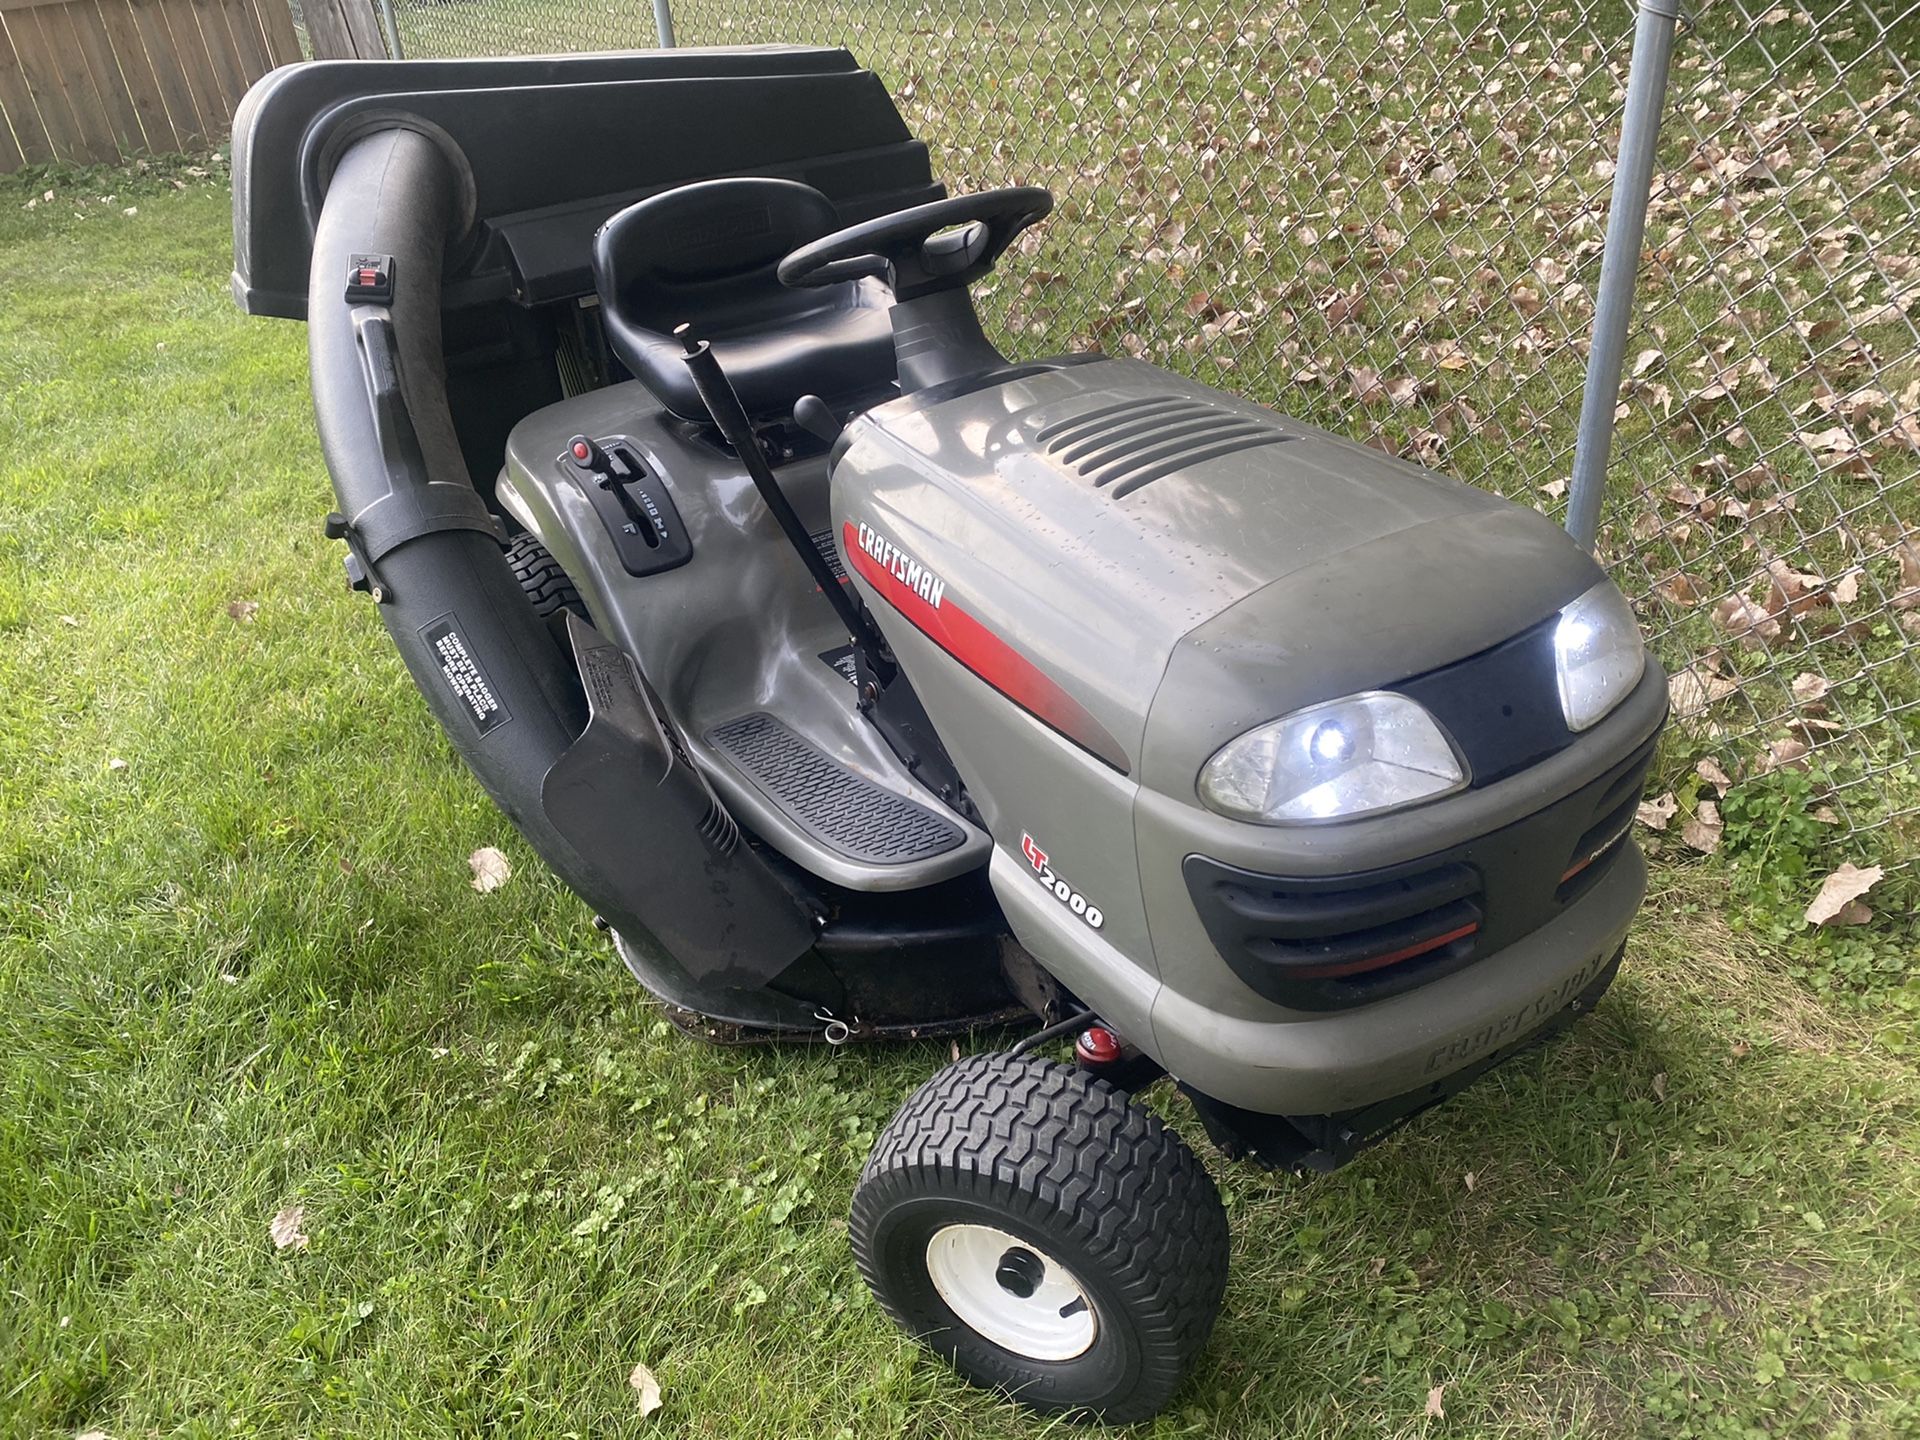 Auto Trans Riding Lawn Mower with Triple Bagger System and Available Tow Cart